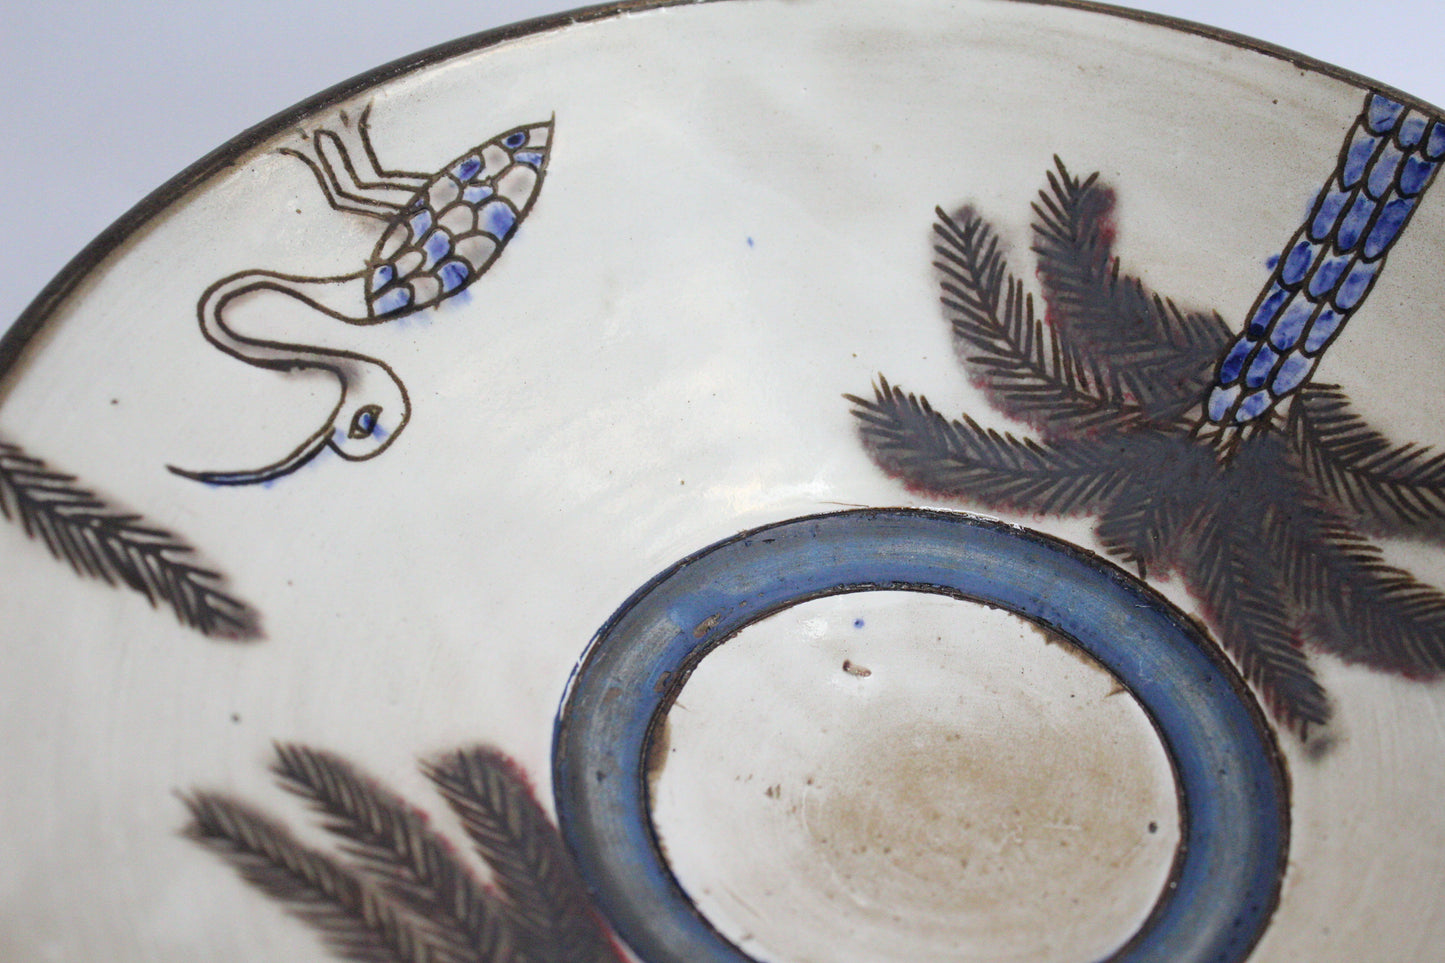 Pottery Round Plate - Palm Tree & Egret